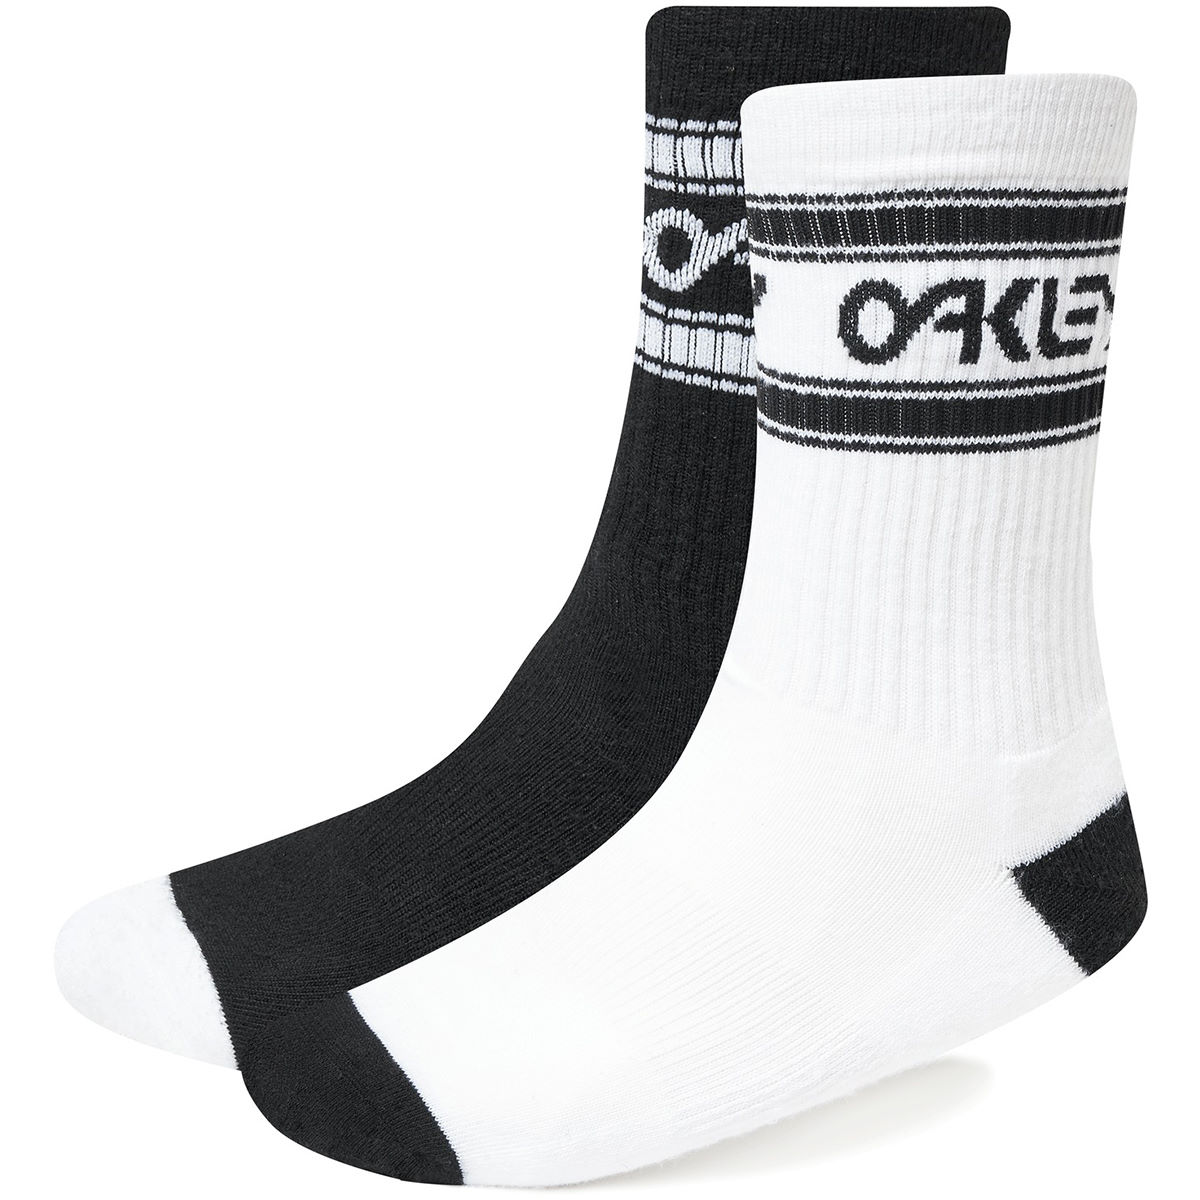 Calcetines Oakley B1B (2 pares) - Calcetines